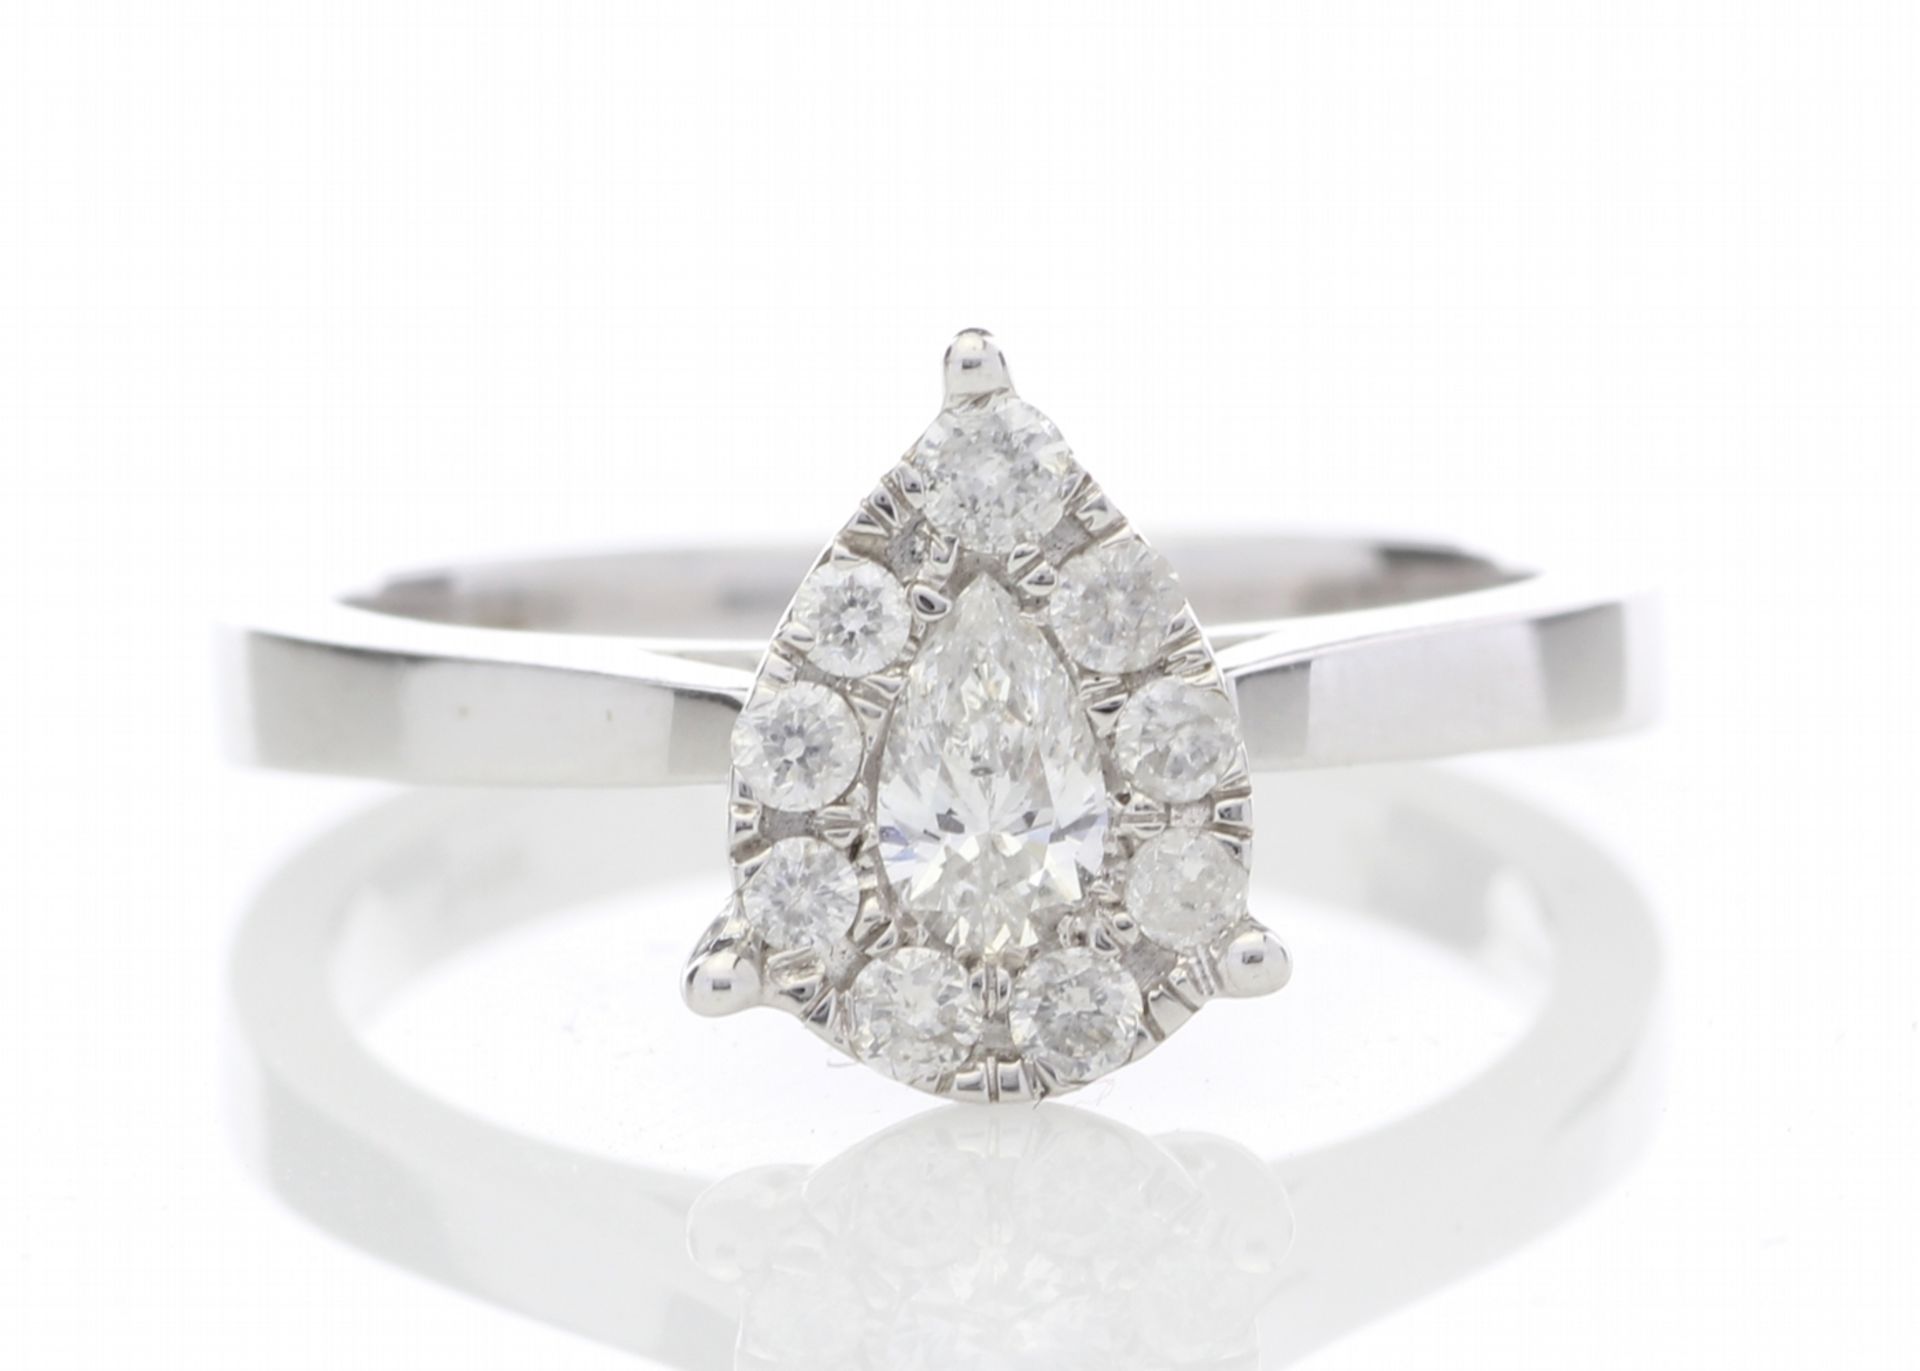 18ct White Gold Semi Eternity Baguette Cut Diamond Ring 1.08 Carats - Valued By IDI £14,870.00 -